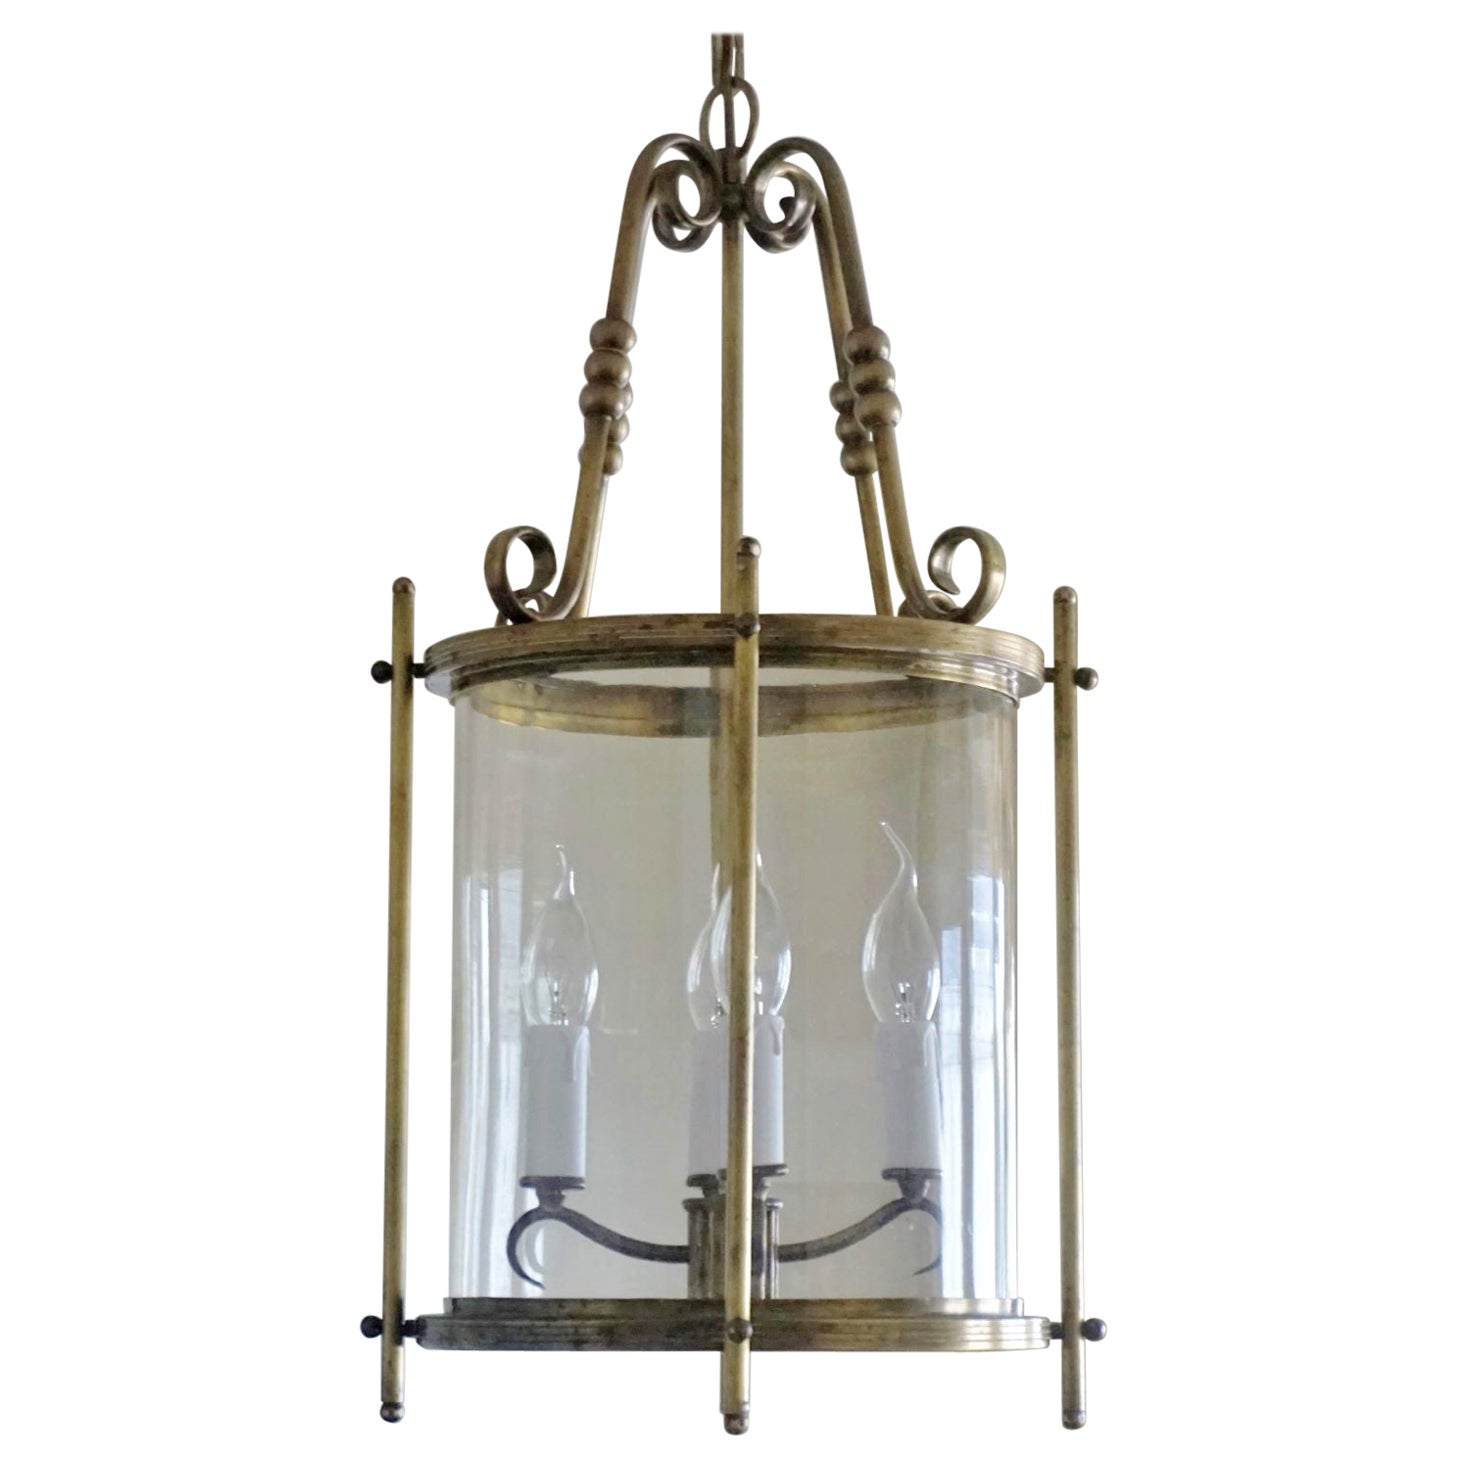 A Art Deco bronze and clear glass cylindrical lantern with a central four-light candelabra cluster, France, 1930-1939. This lantern is in very good condition, no damages, rewired.
Four E-14 light candle bulb sockets.
Measures:
Overall height with